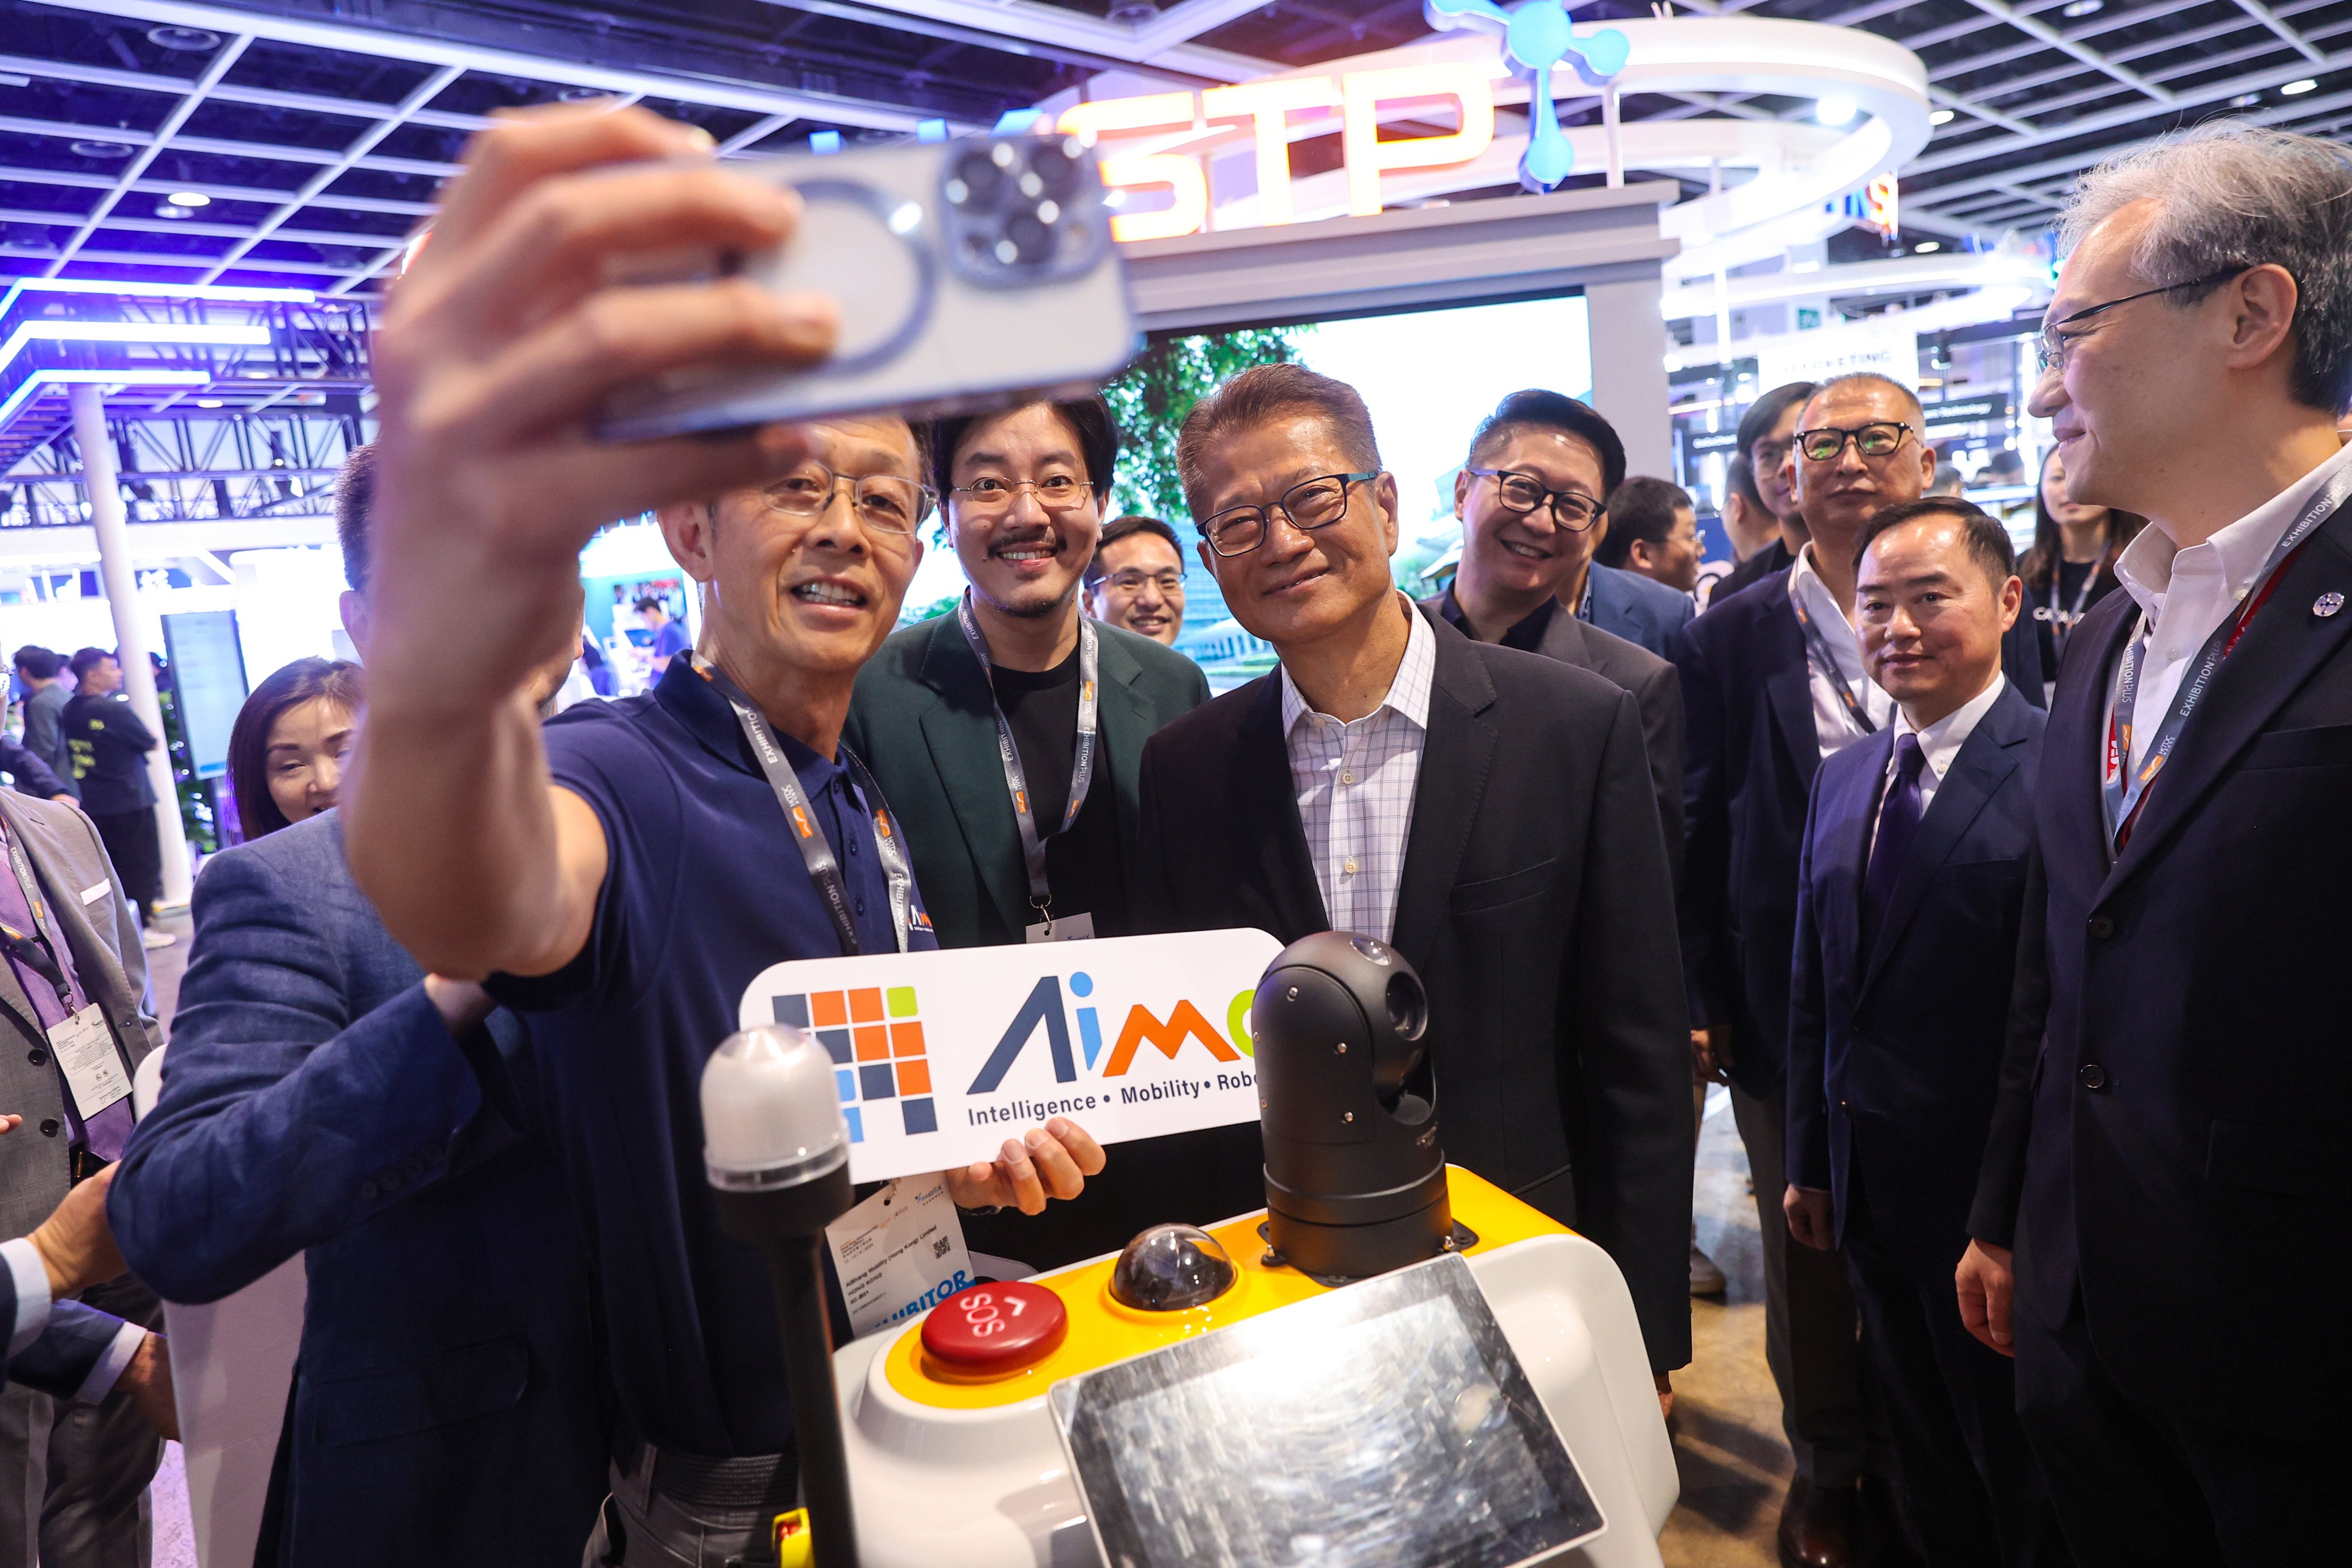 Finance chief Paul Chan poses for a photo at an exhibition earlier in the year. He says an efficient data ecosystem attracts businesses to the city. Photo: Edmond So